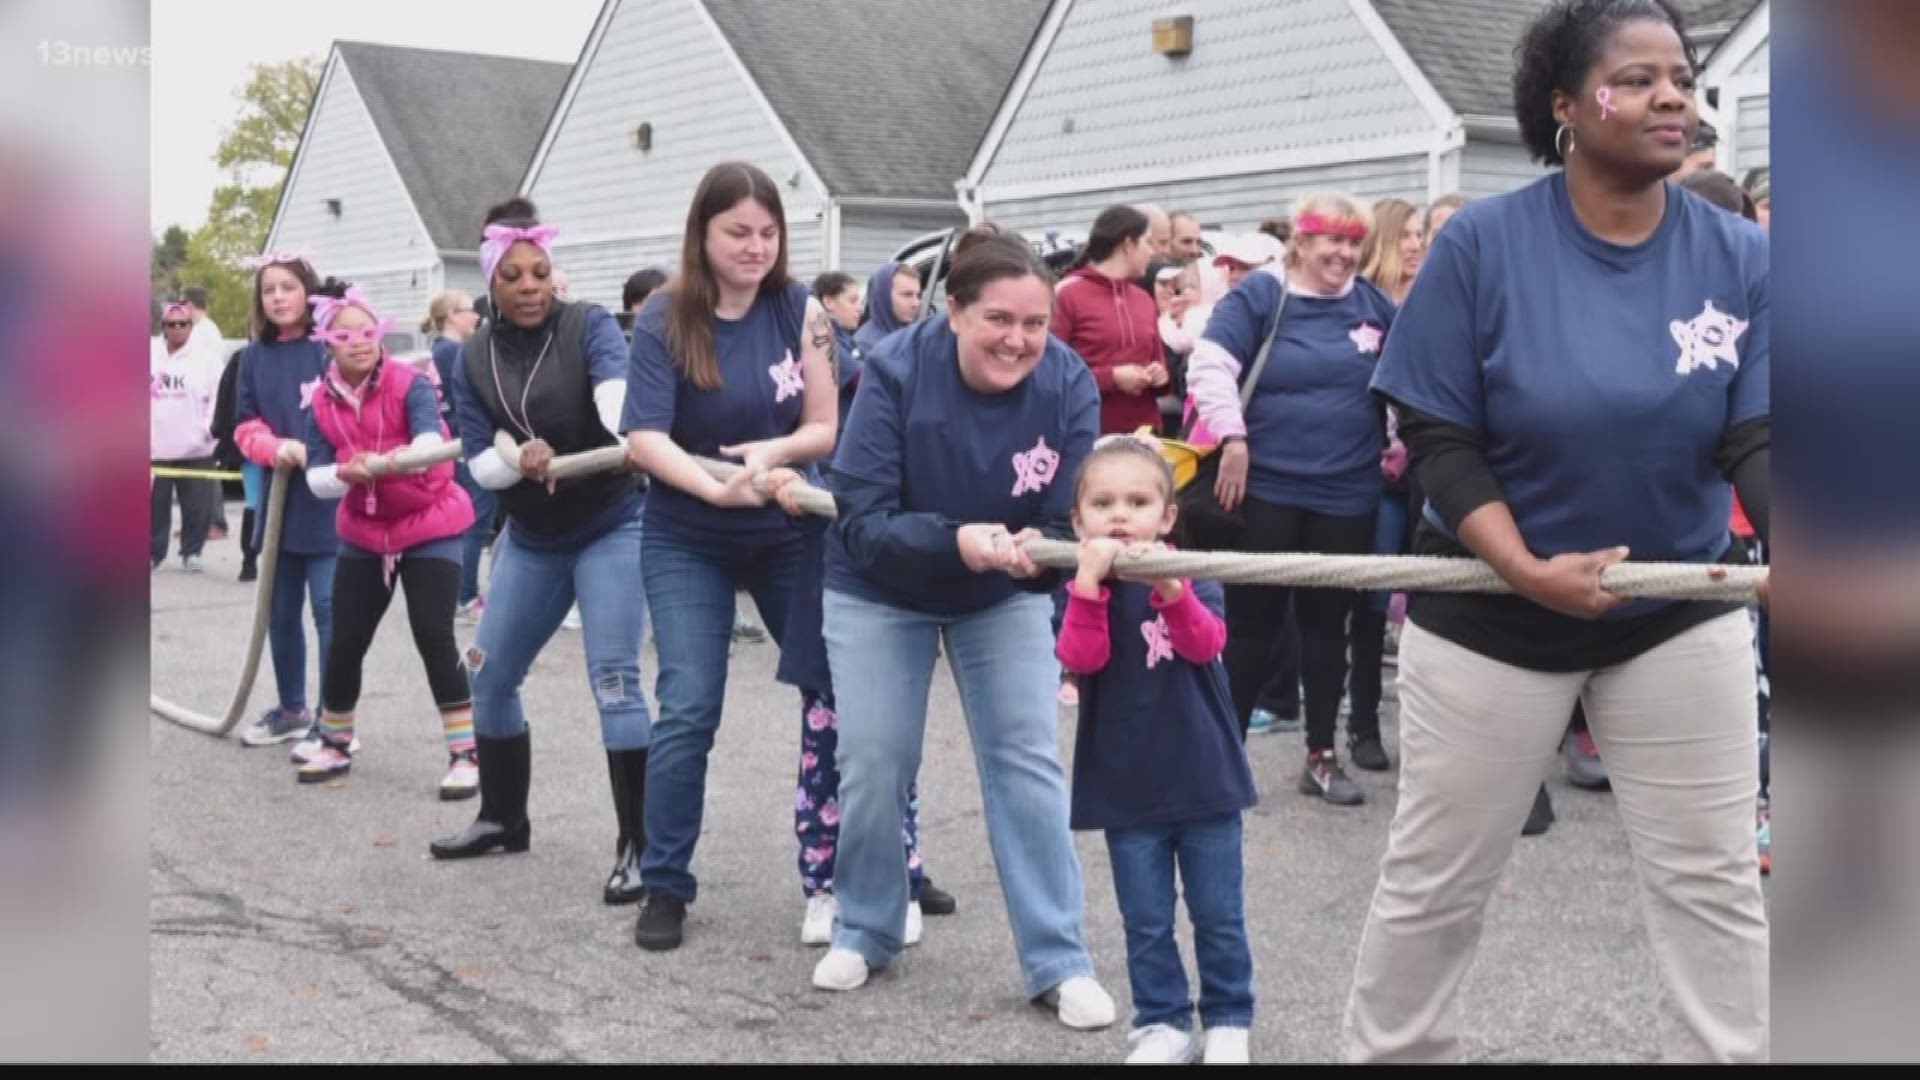 The Chesapeake Sheriff's Office hosted the 4th Annual Pull for Pink that had 34 teams competing to see which team could pull a fire truck 12 feet in the fastest time.